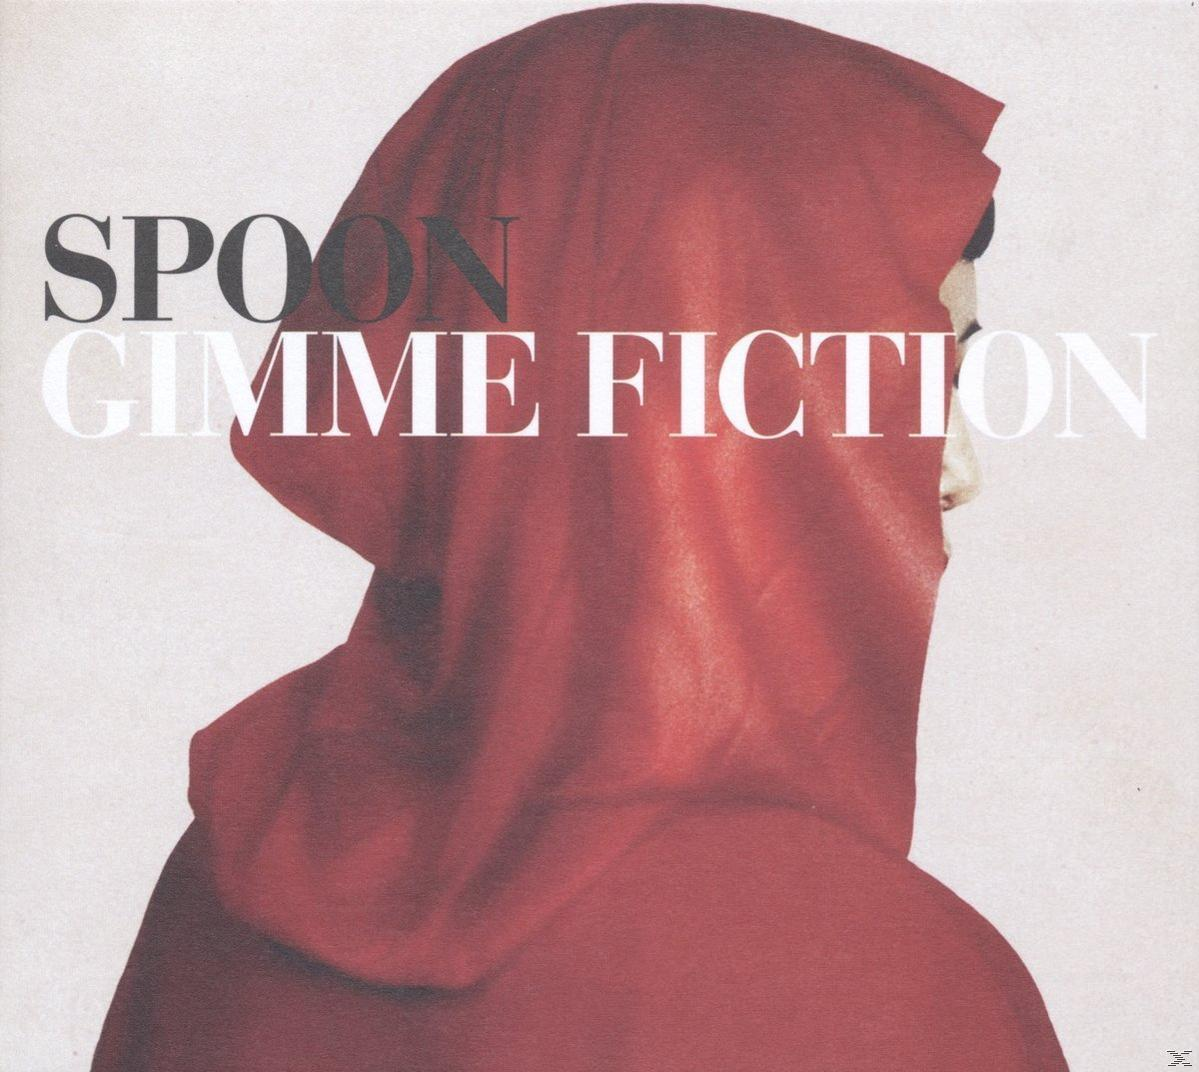 (CD) - Edition Fiction-Deluxe Spoon - Gimme